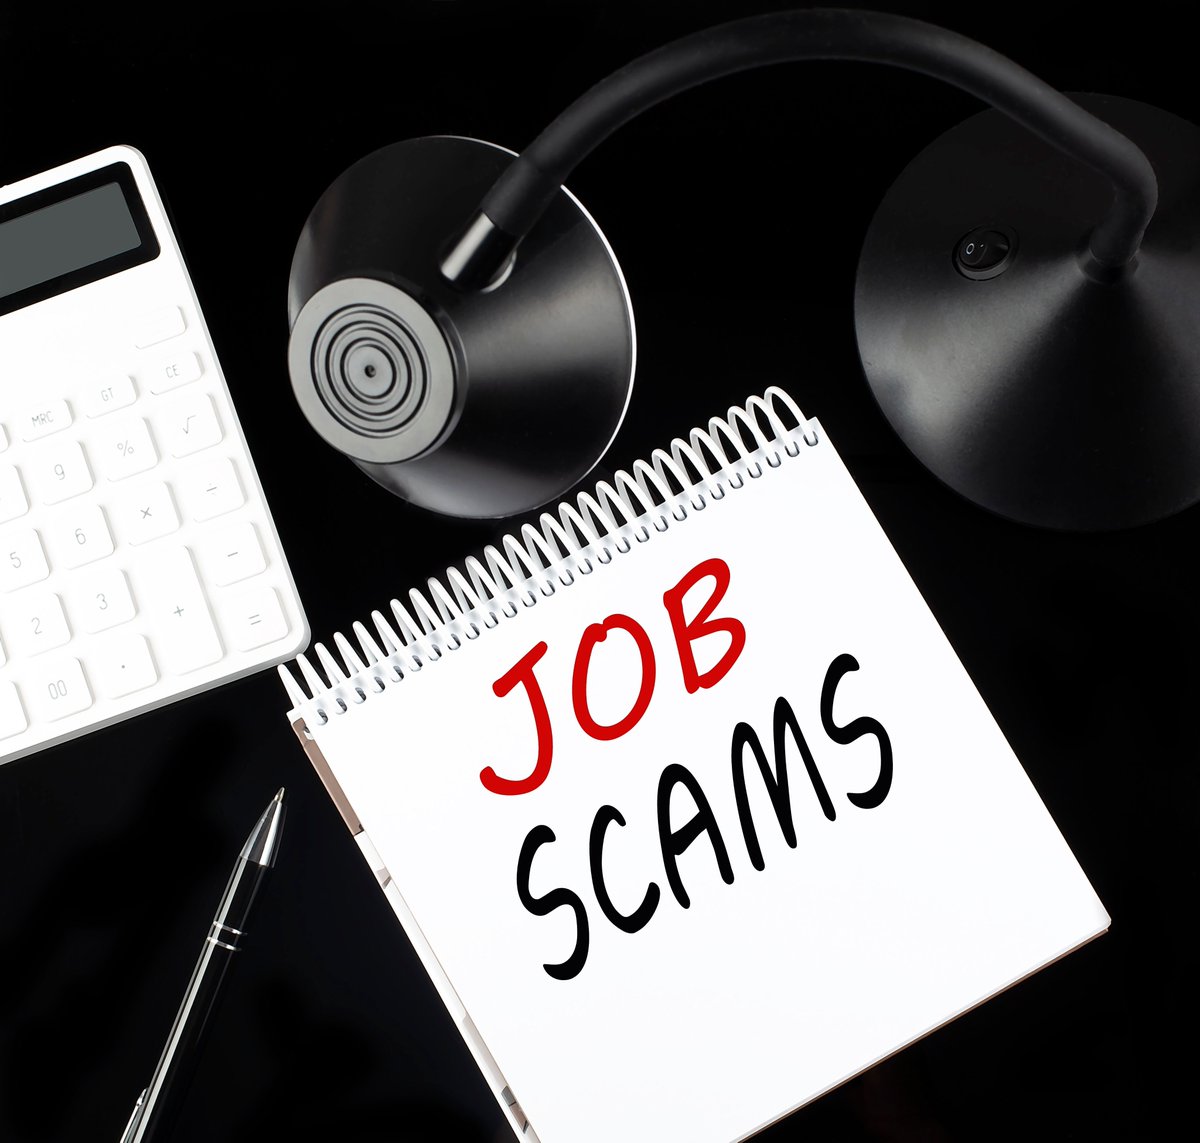 Job scams are on the rise in Canada. Protect yourself. For information see: antifraudcentre-centreantifraude.ca/scams-fraudes/… globalnews.ca/news/9925896/j… @peelpolice @canantifraud @dk2241 @InspBrennan #fraudprevention